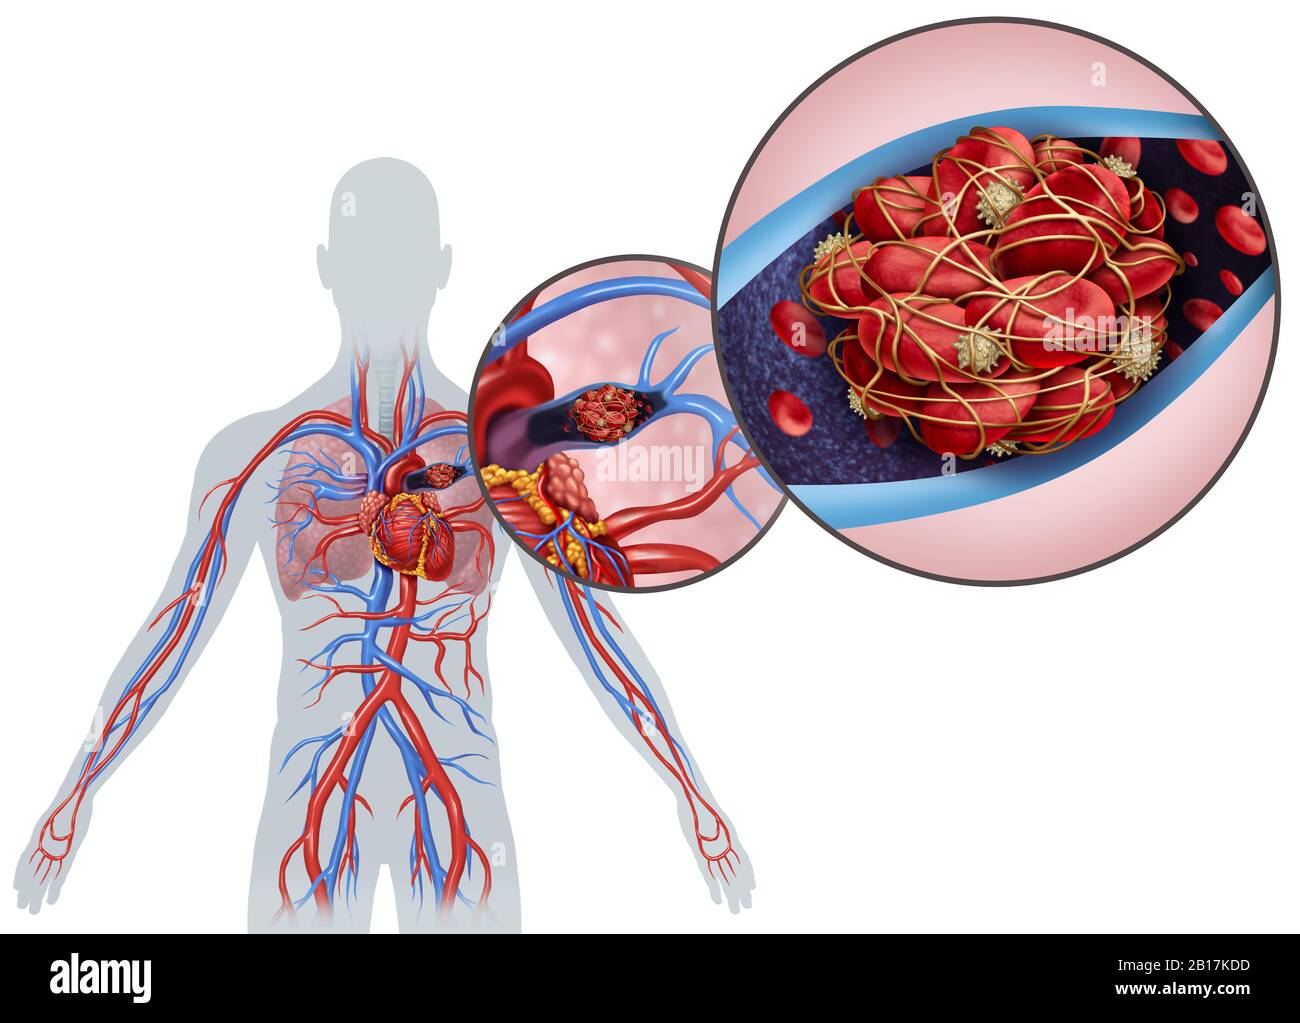 Pulmonary Embolism with a blood clot as a disease with a blockage of an artery in the lungs with 3D illustration elements. Stock Photo